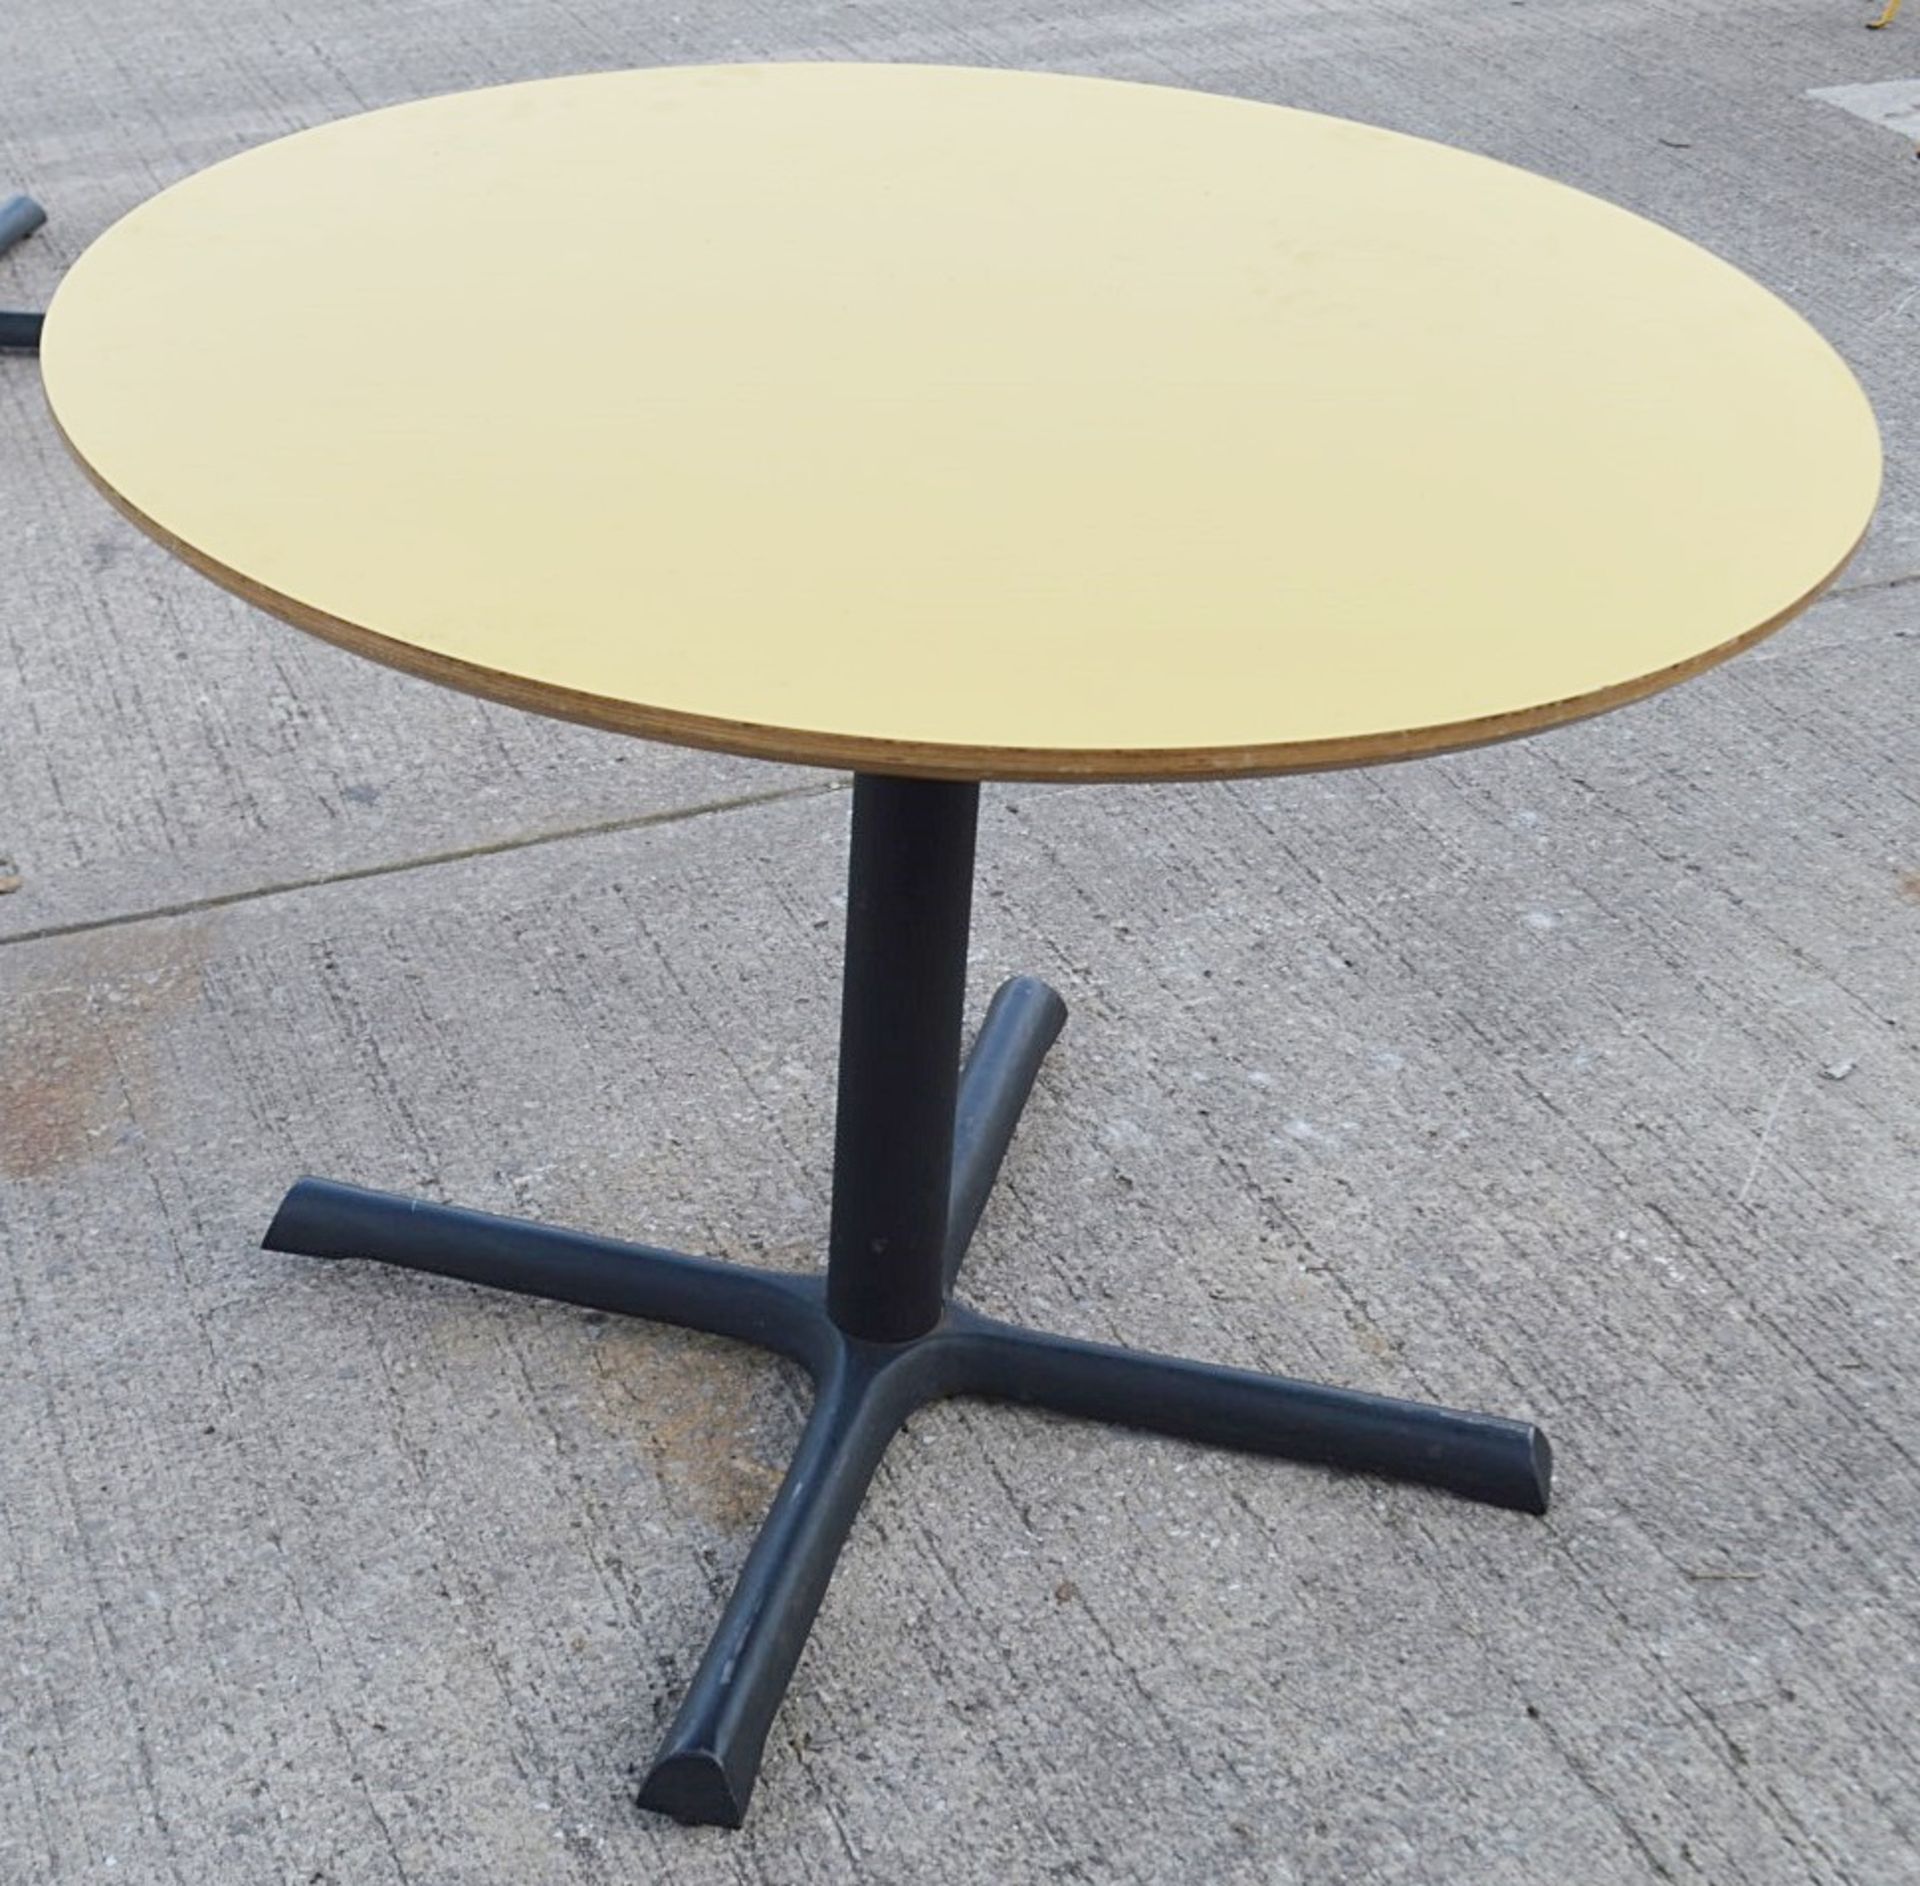 3 x Round Bistro Tables In Yellow And Teal - Dimensions: Diameter 100 x H74cm - Ref: WCH107